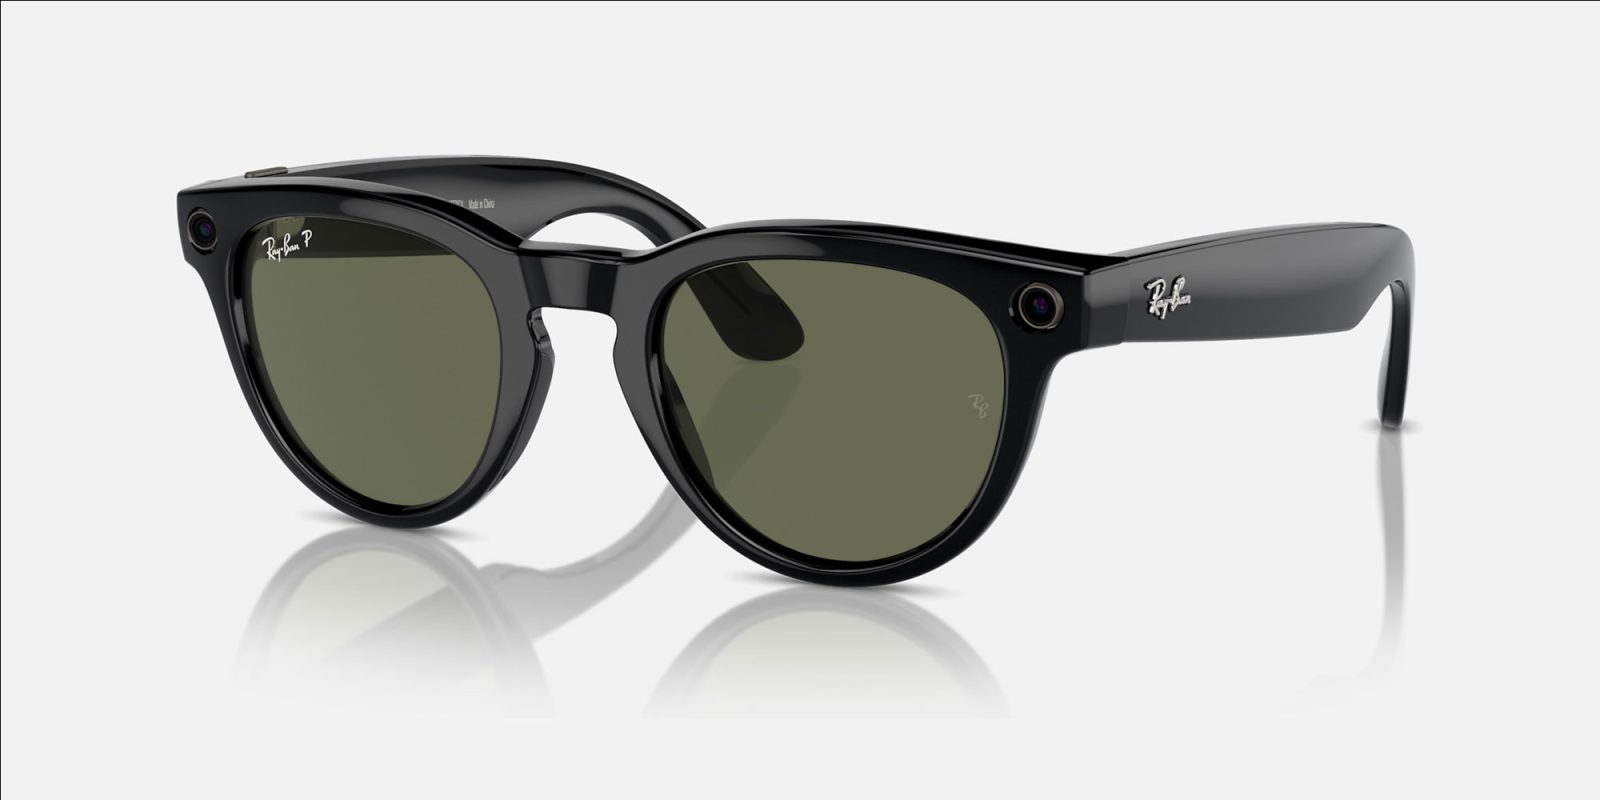 Theres a software update available for ray ban meta glasses –